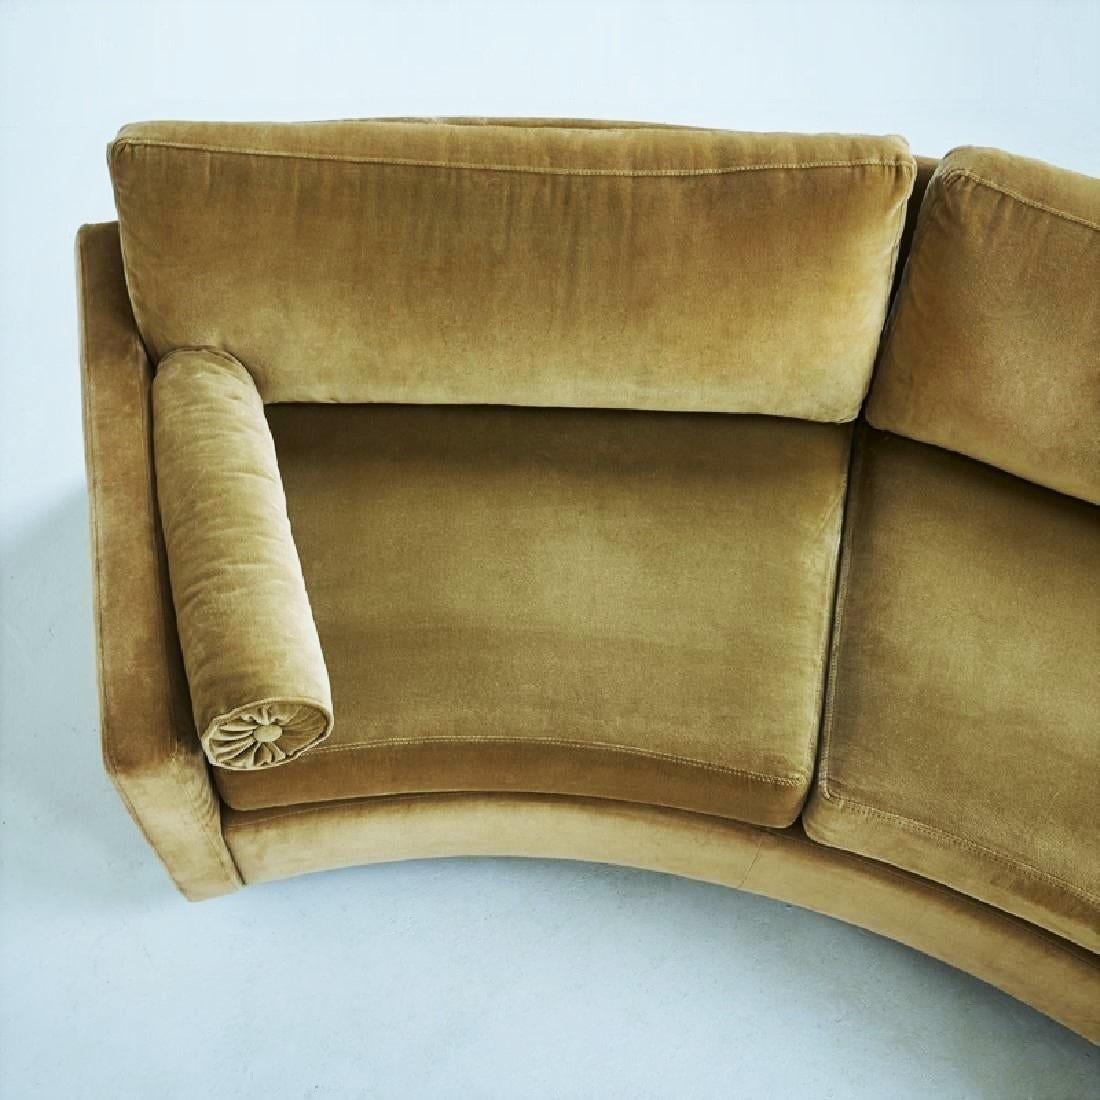 Clean, Minimalist two-piece semi circular sofa, model no 825 designed by Milo Baughman for Thayer Coggin, circa 1968. Comfortable deep seats and low slung profile. Newly upholstered in velvet with loose back and seat cushions resting on dark stained